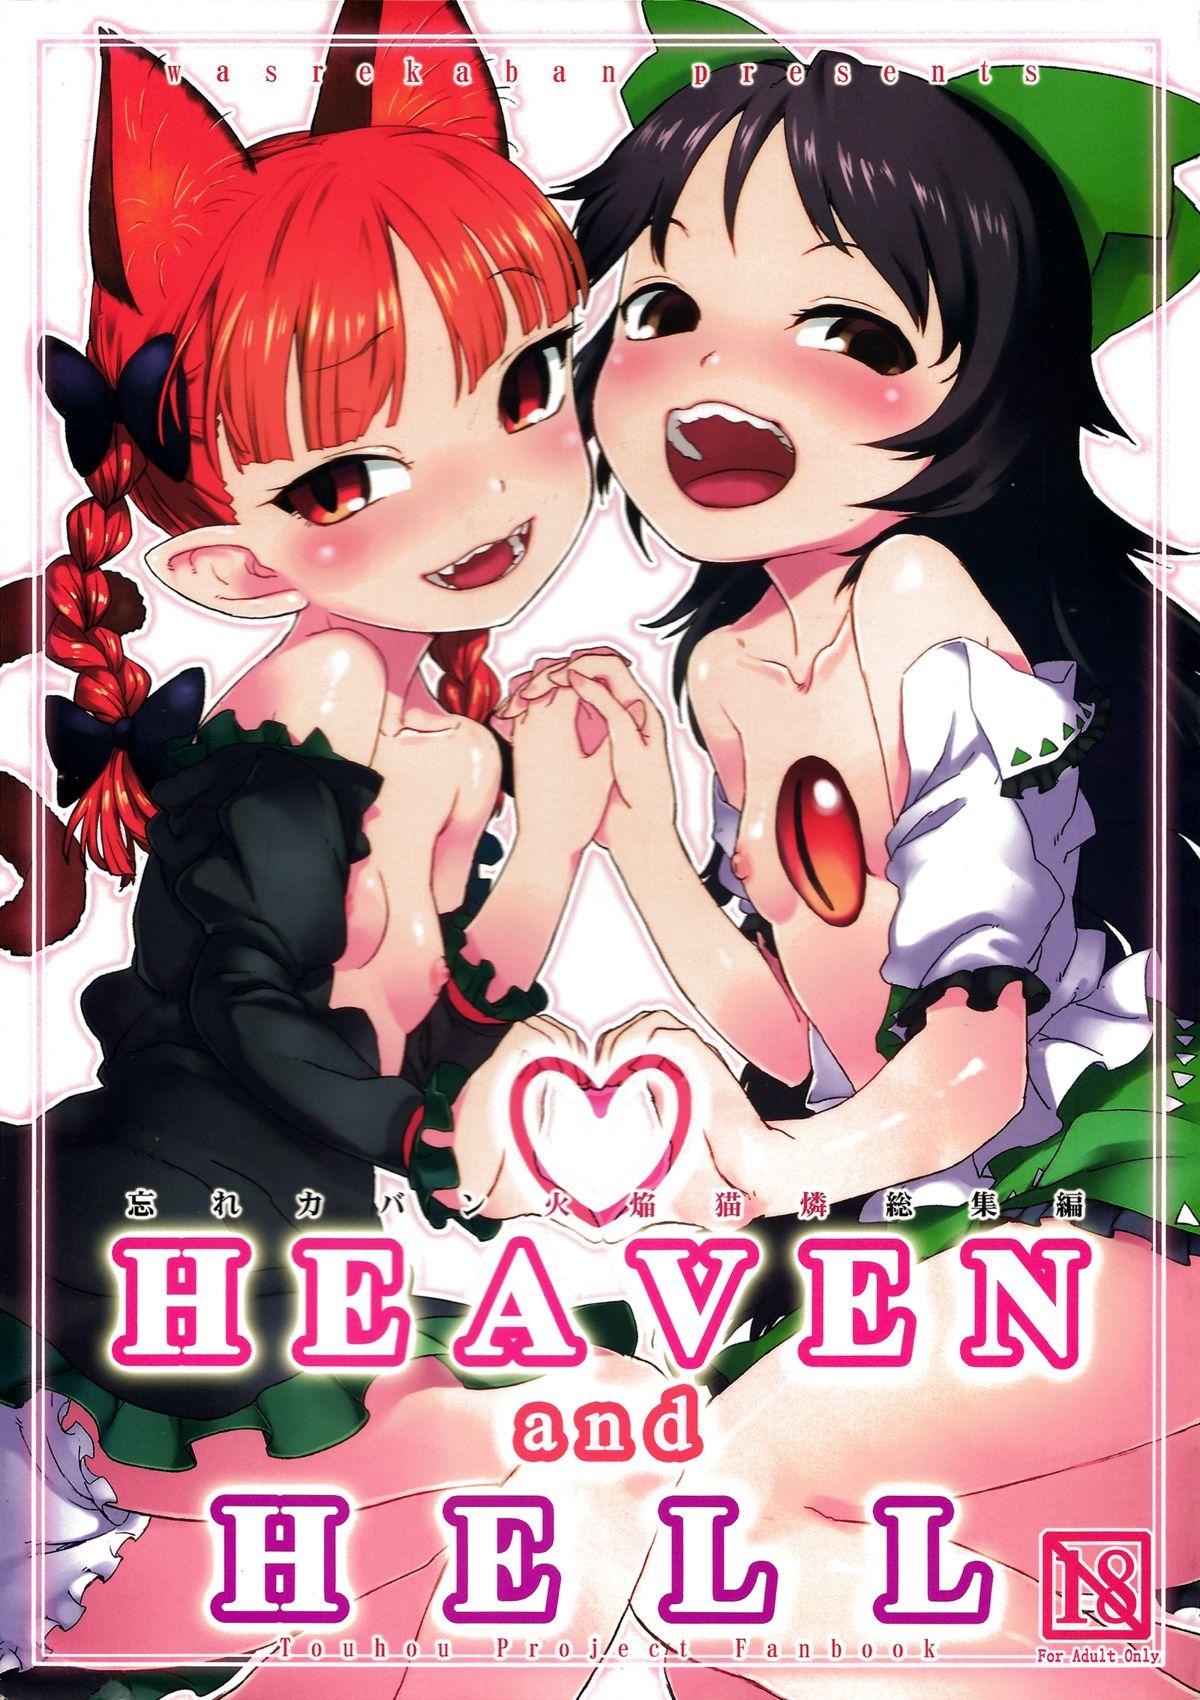 Mofos HEAVEN and HELL - Touhou project Party - Page 1